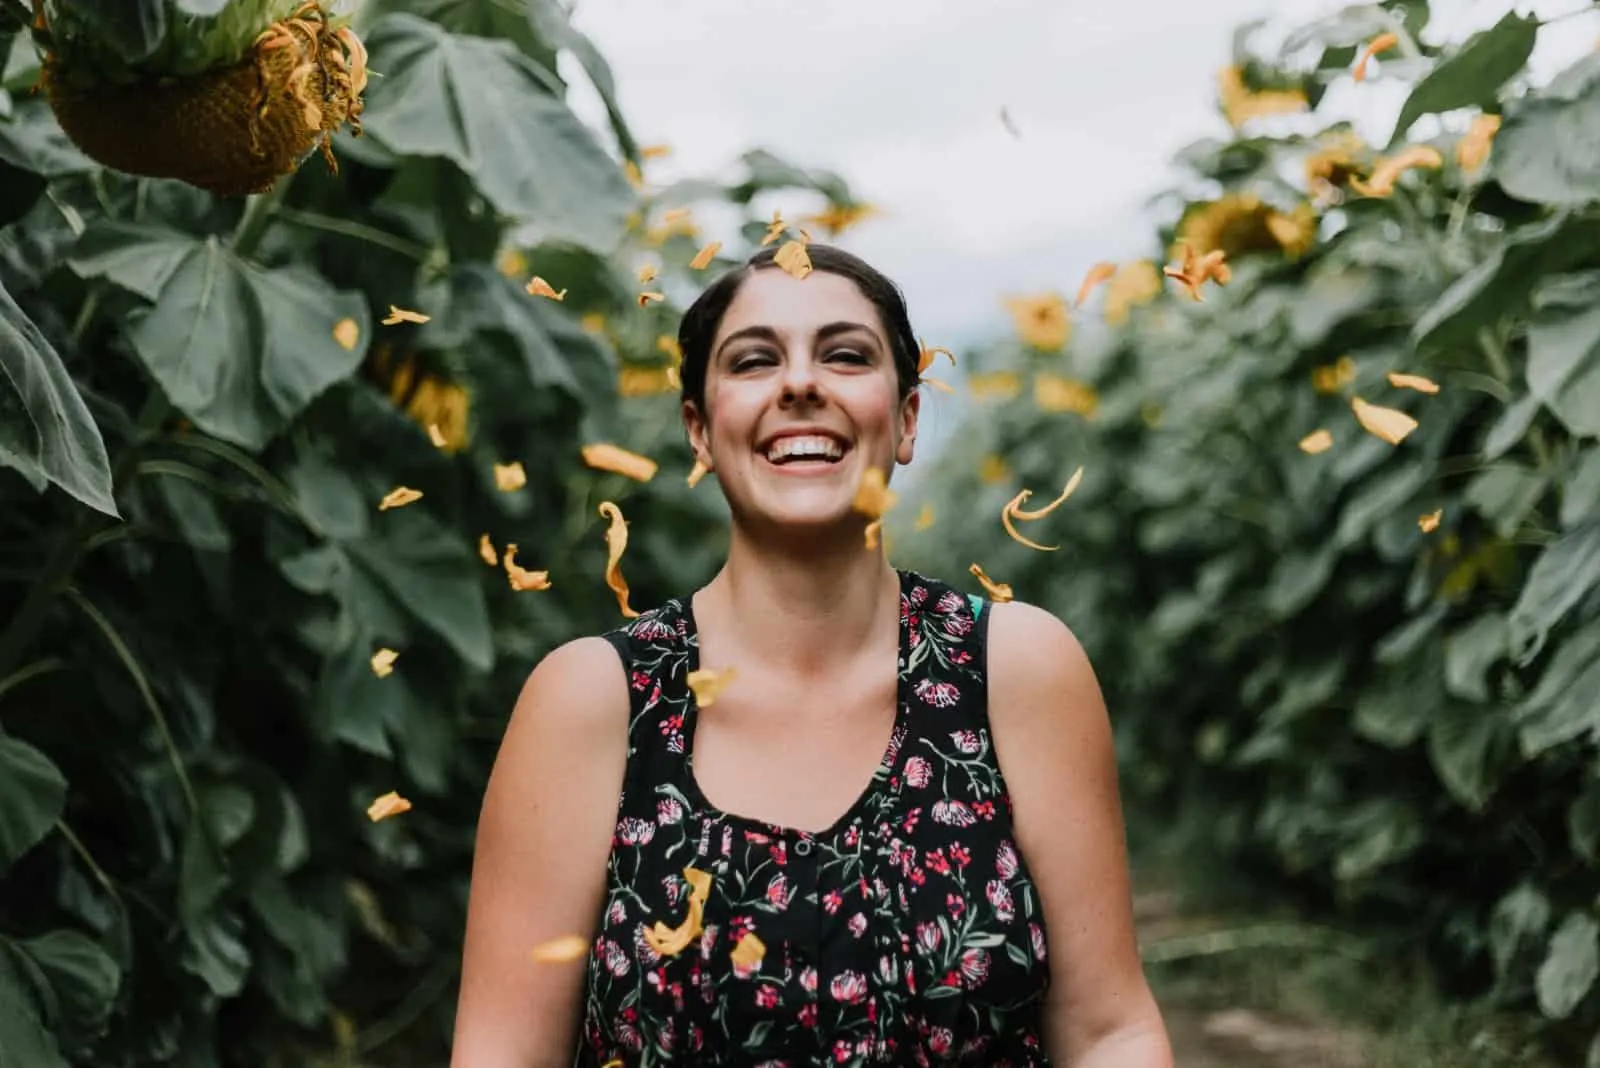 woman smiling while standing in corn field